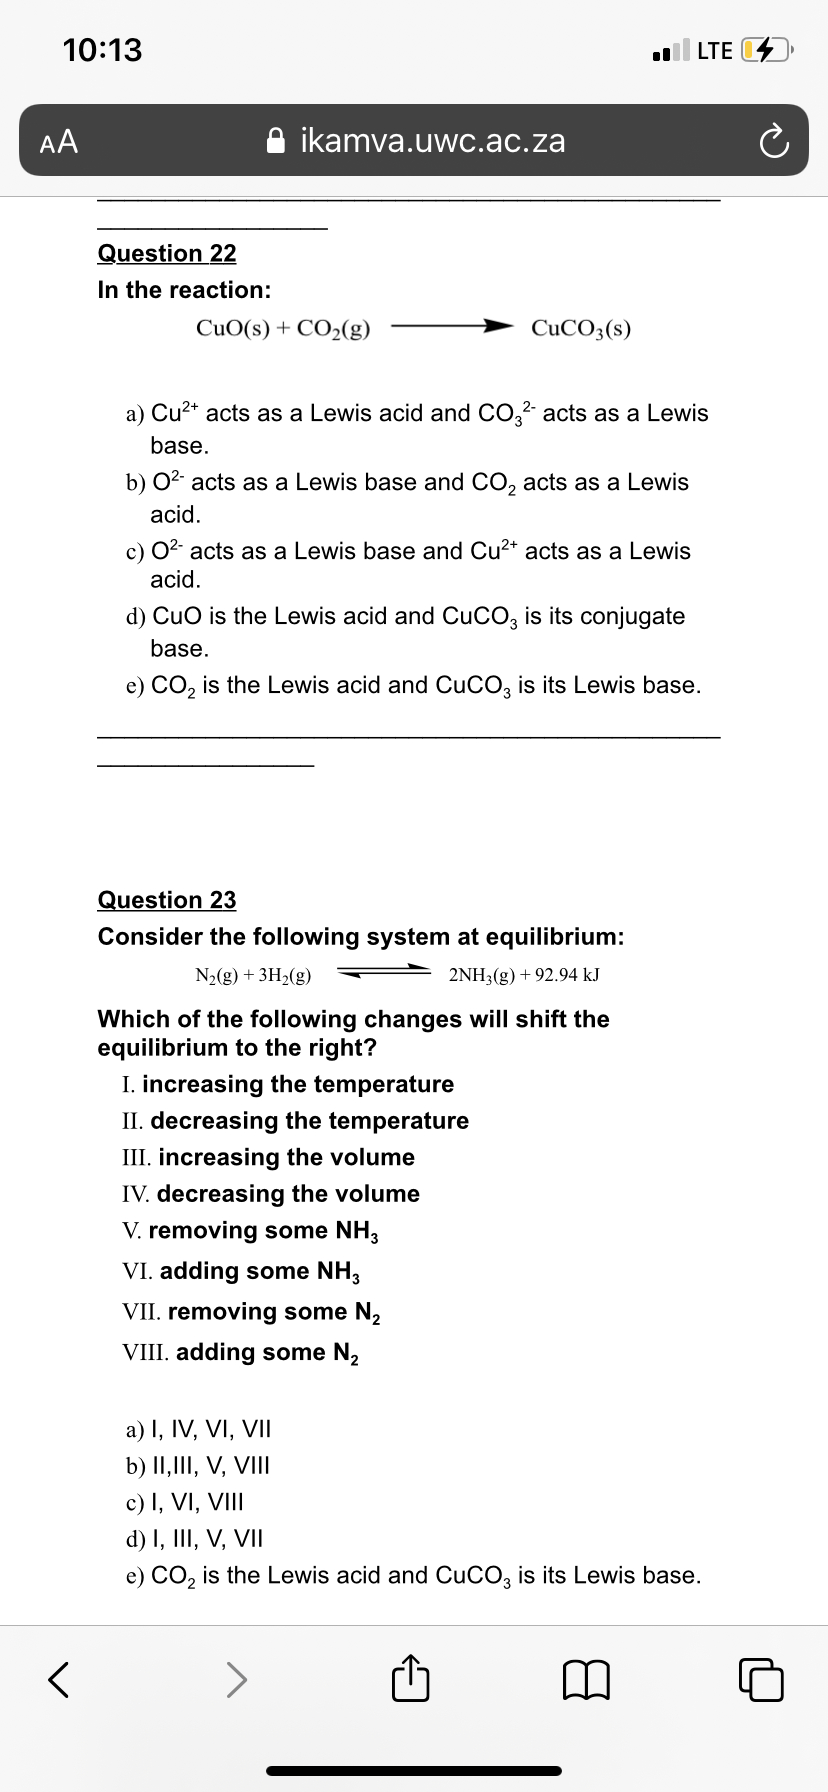 10:13
LTE D
AA
ikamva.uwc.ac.za
Question 22
In the reaction:
CuO(s) + CO2(g)
CUCO3(s)
a) Cu²* acts as a Lewis acid and CO,2 acts as a Lewis
base.
b) 02 acts as a Lewis base and CO, acts as a Lewis
acid.
c) 02 acts as a Lewis base and Cu2* acts as a Lewis
acid.
d) CuO is the Lewis acid and CUCO3 is its conjugate
base.
e) CO, is the Lewis acid and CuCO, is its Lewis base.
Question 23
Consider the following system at equilibrium:
N2(g) + 3H2(g)
2NH3(g) + 92.94 kJ
Which of the following changes will shift the
equilibrium to the right?
I. increasing the temperature
II. decreasing the temperature
III. increasing the volume
IV. decreasing the volume
V. removing some NH3
VI. adding some NH,
VII. removing some N,
VIII. adding some N2
a) I, IV, VI, VII
b) II,III, V, VIII
c) I, VI, VIII
d) I, III, V, VII
e) CO, is the Lewis acid and CuCO, is its Lewis base.
